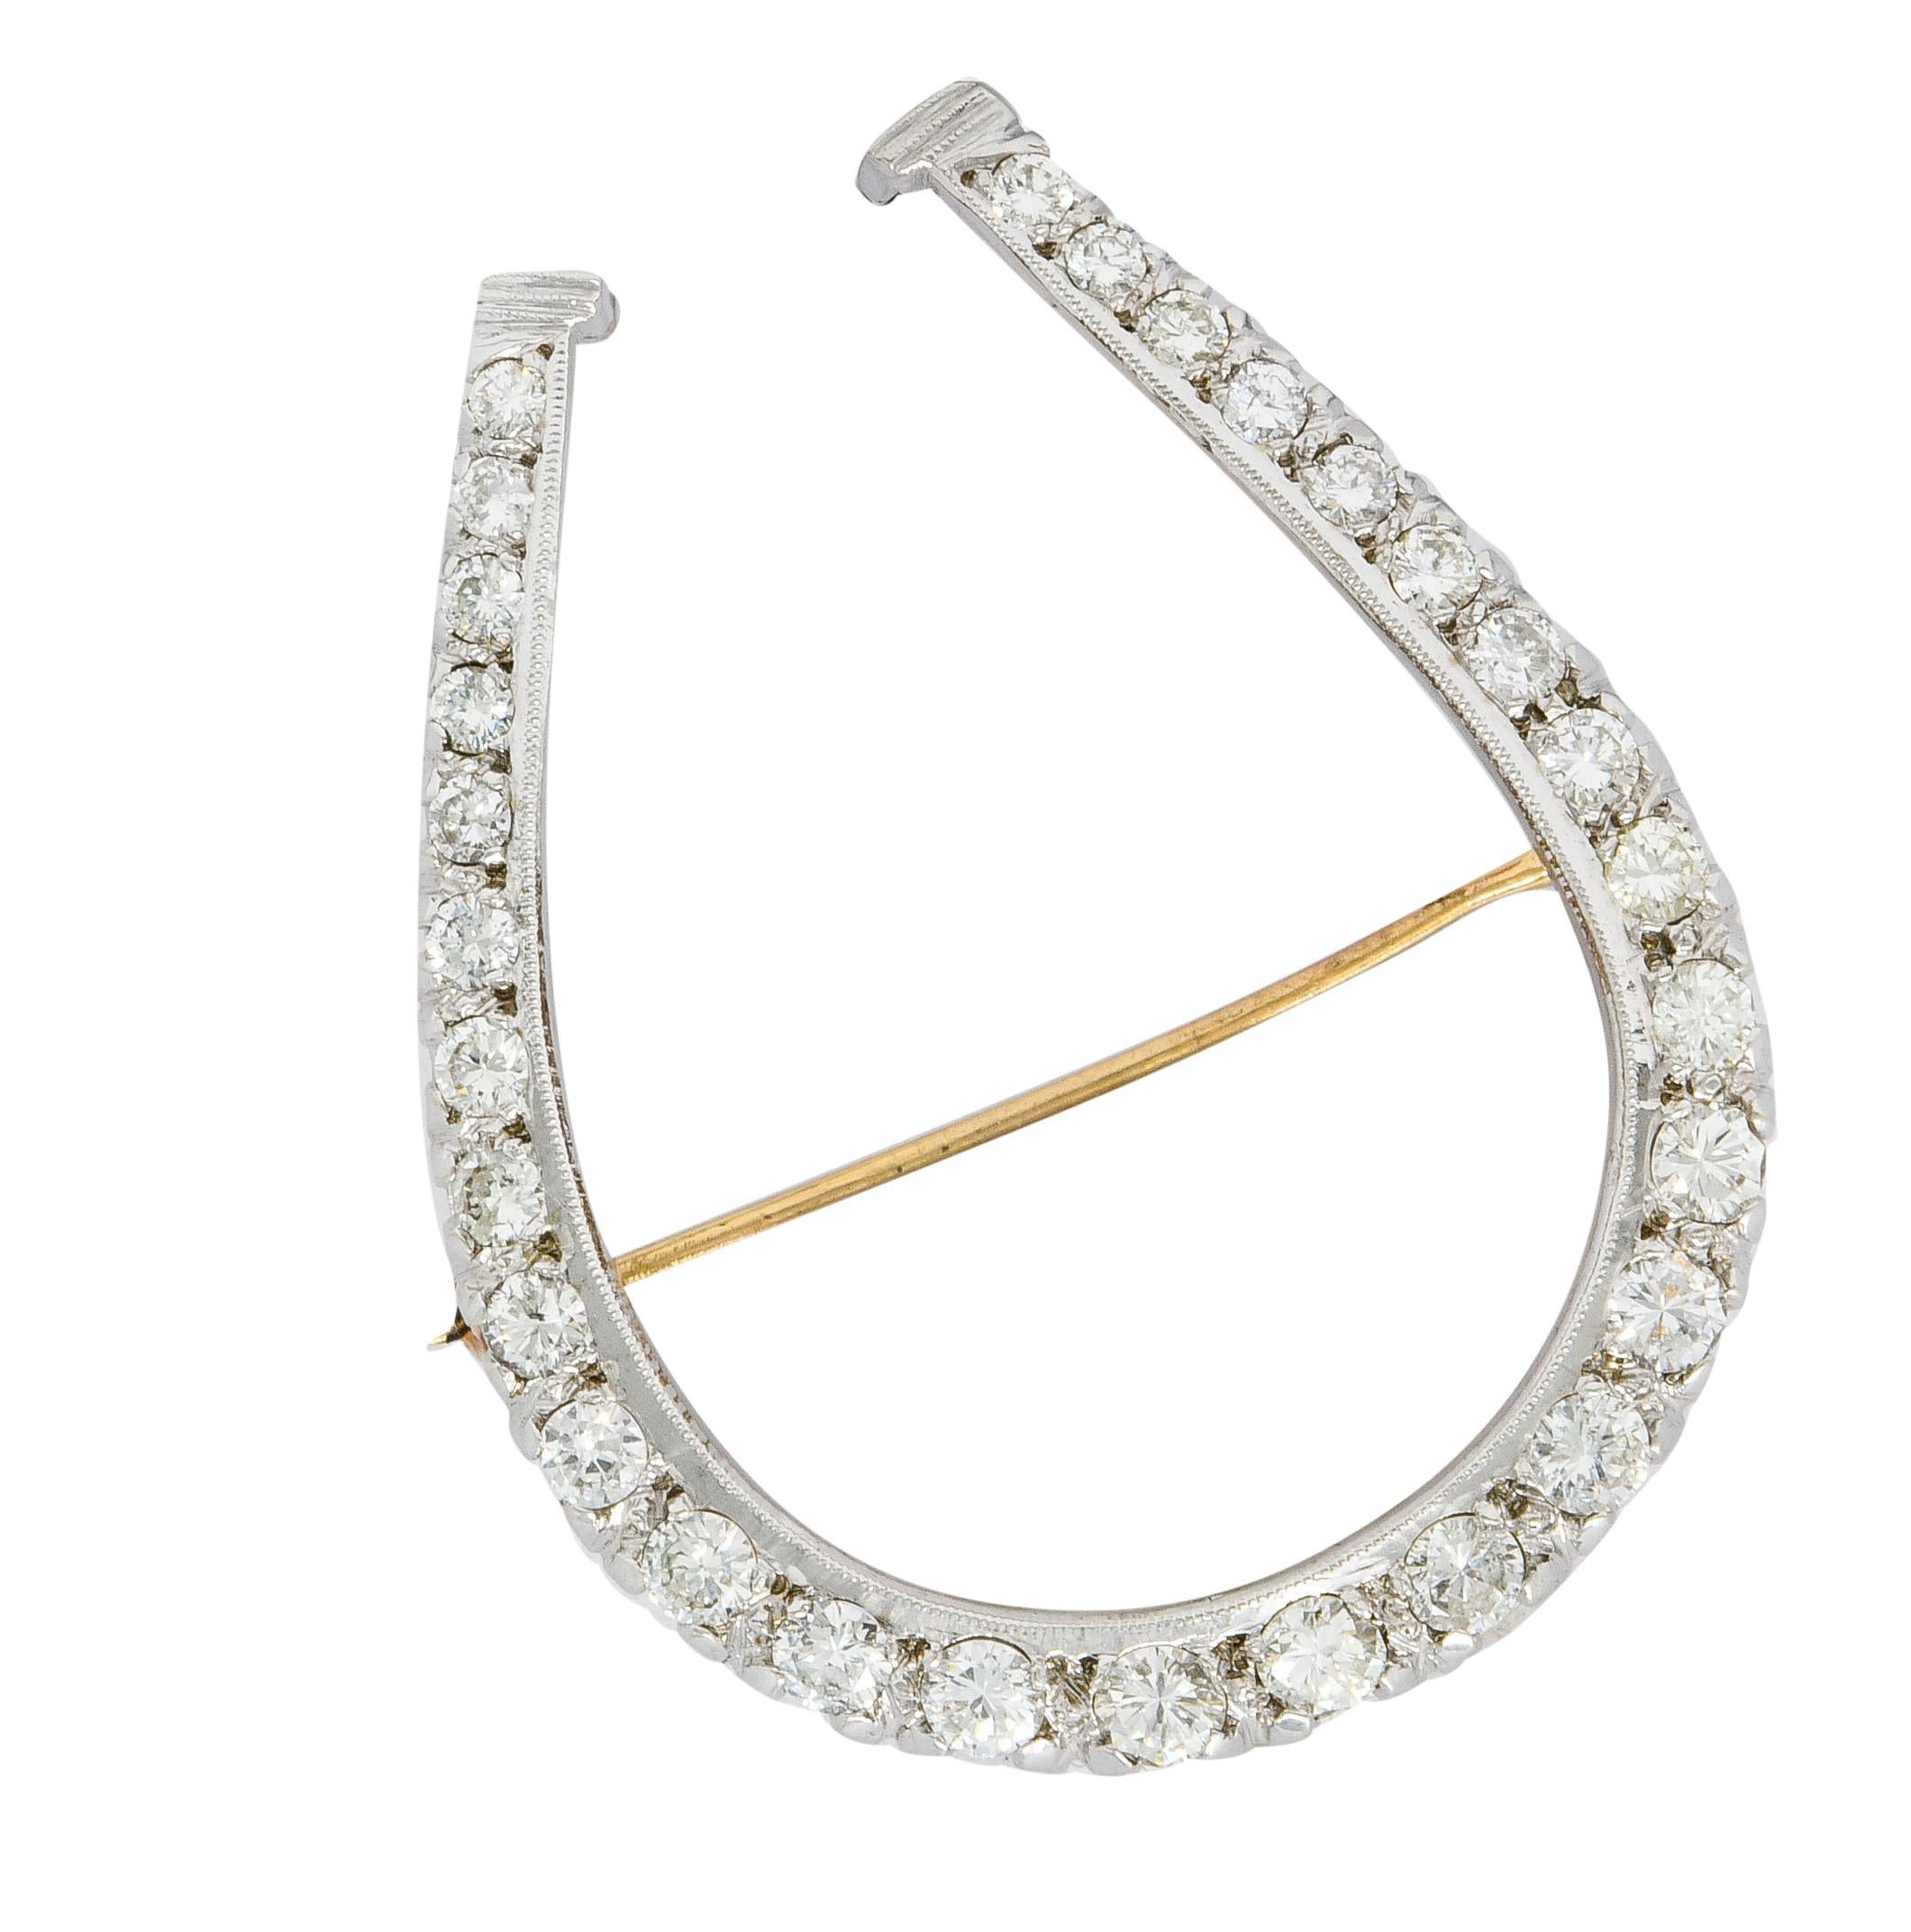 Brooch is designed as a substantially sized horseshoe with a stylized fishtail gallery

Set throughout by round brilliant cut diamonds weighing approximately 2.45 carats; G to J color with VS to SI clarity

Accented by milgrain and a scalloped